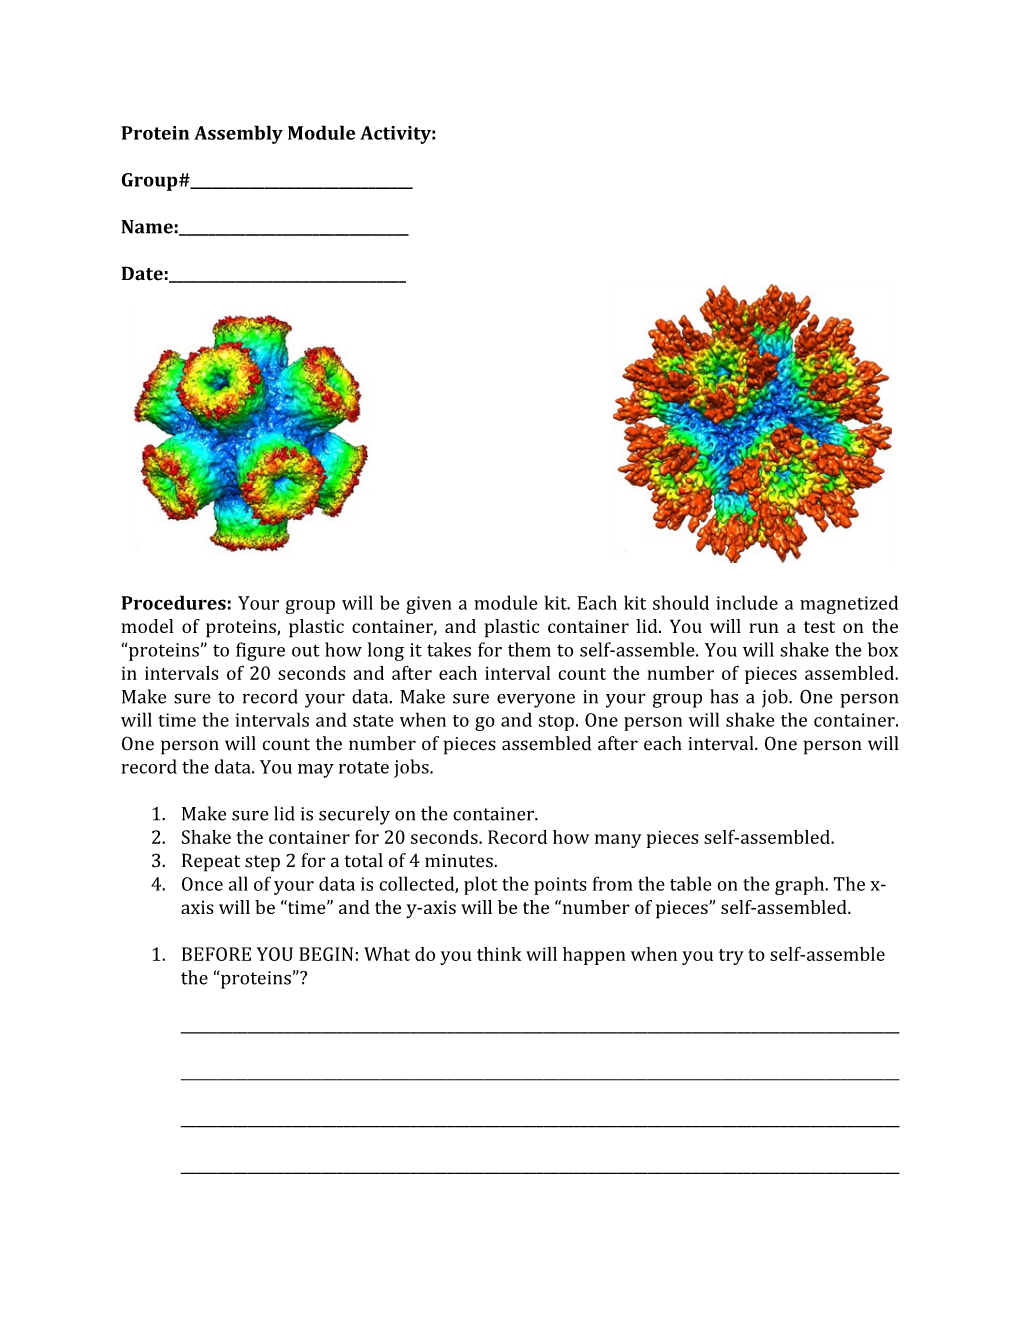 Protein Assembly Module Activity